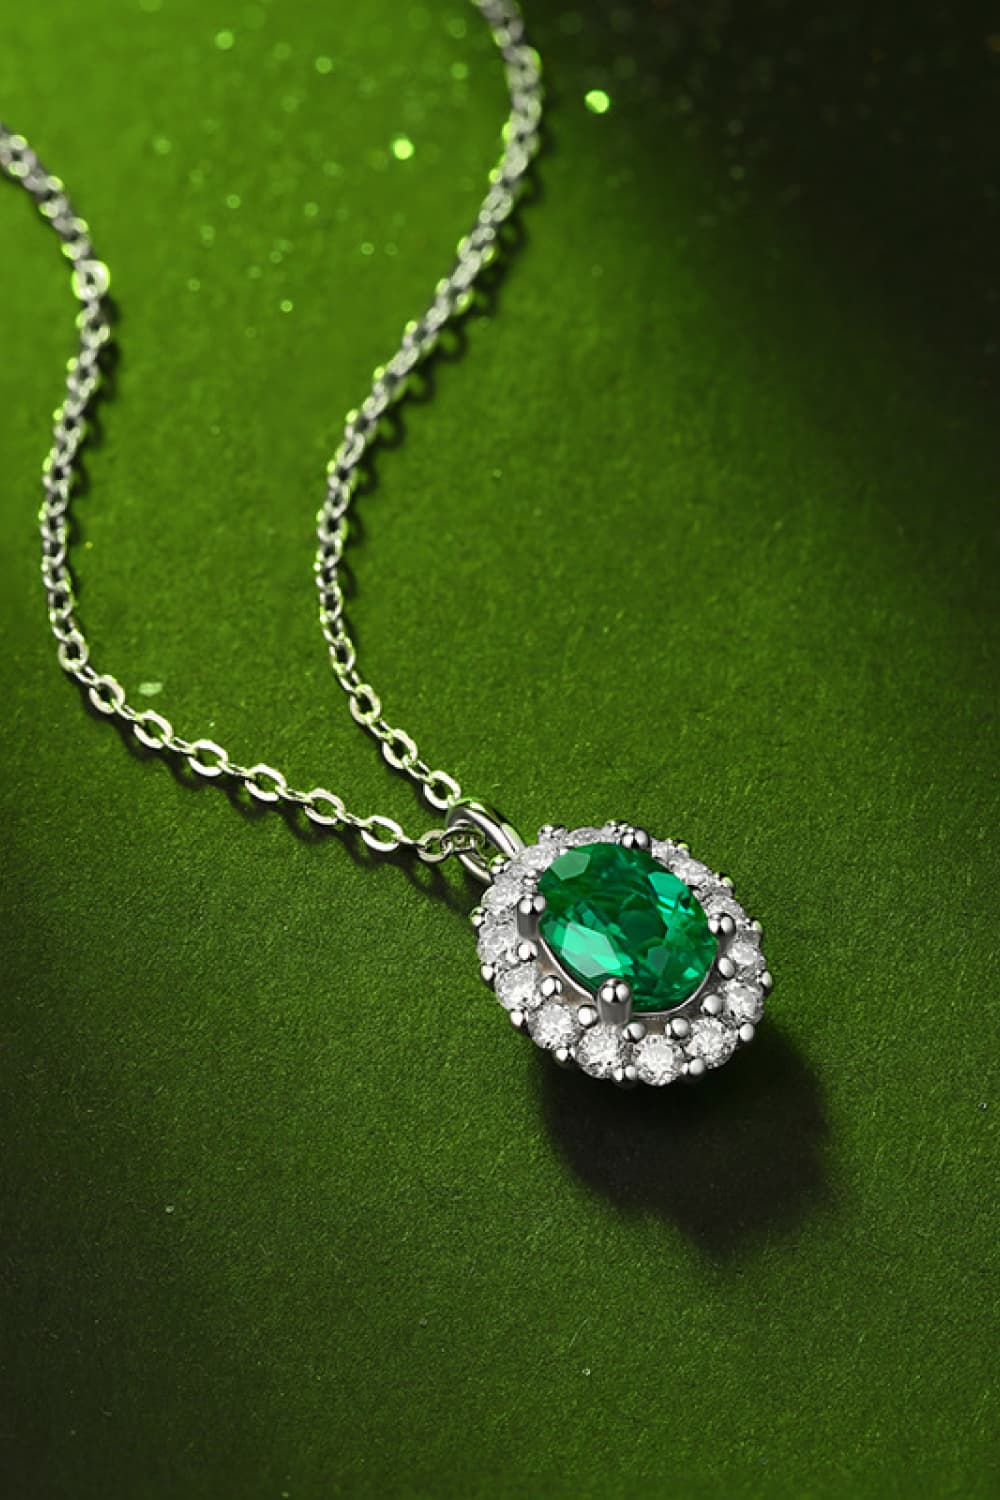 1.5 Carat Lab-Grown Emerald 925 Sterling Silver Necklace king-general-store-5710.myshopify.com